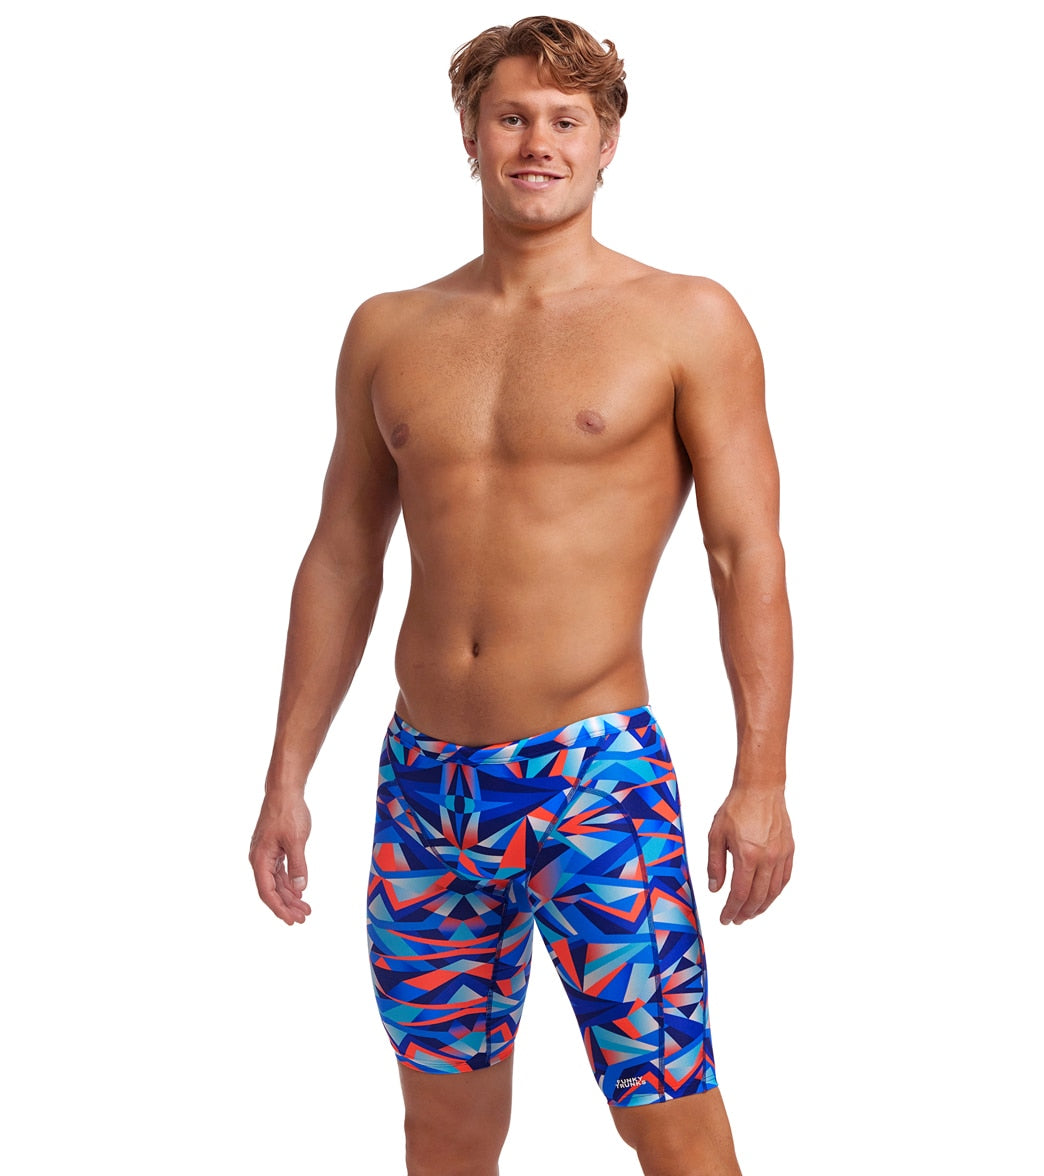 Funky Trunks Men's Mad Mirror Training Jammer Swimsuit at SwimOutlet.com